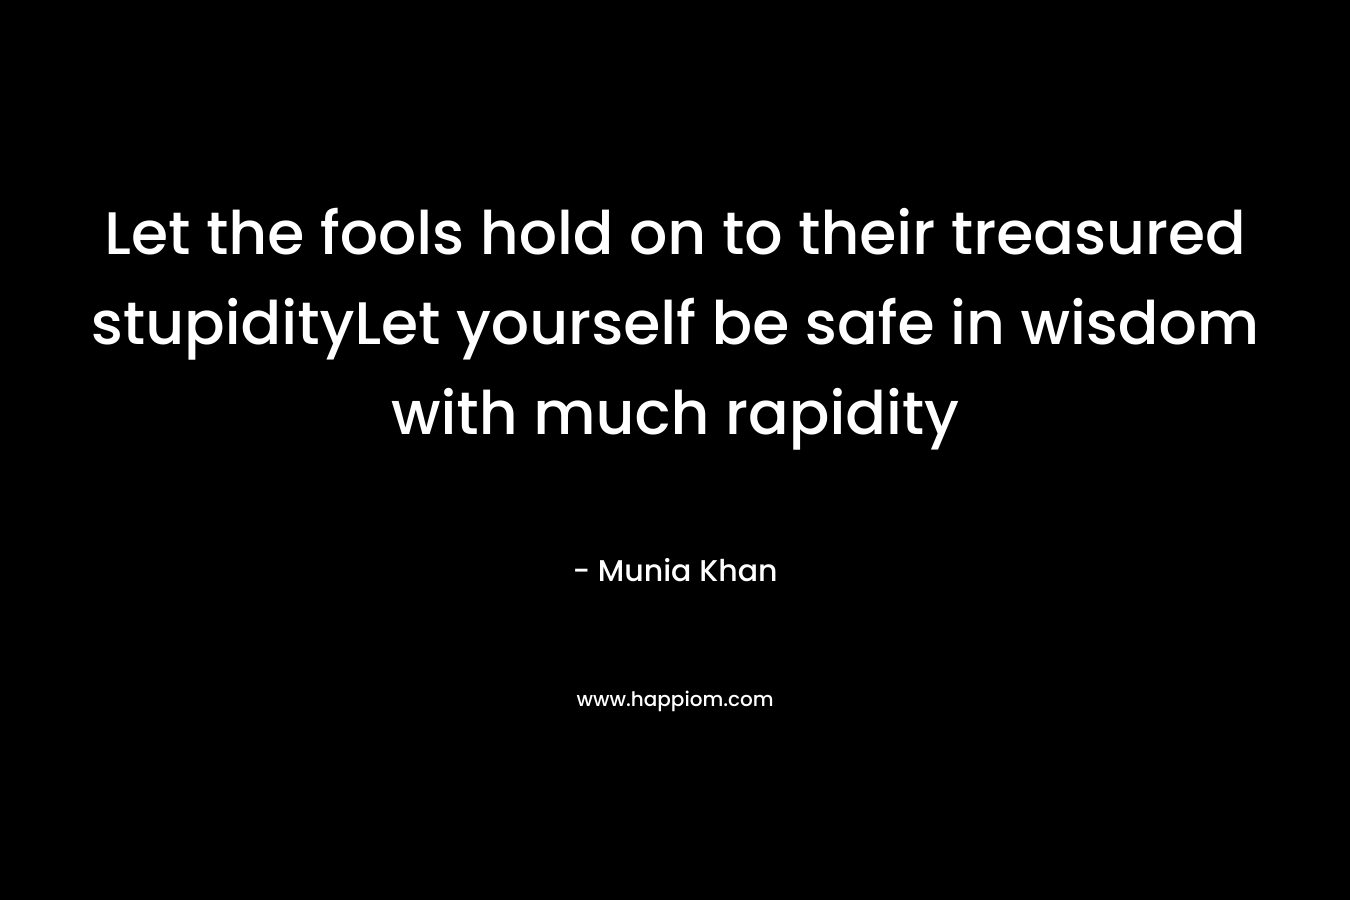 Let the fools hold on to their treasured stupidityLet yourself be safe in wisdom with much rapidity – Munia Khan